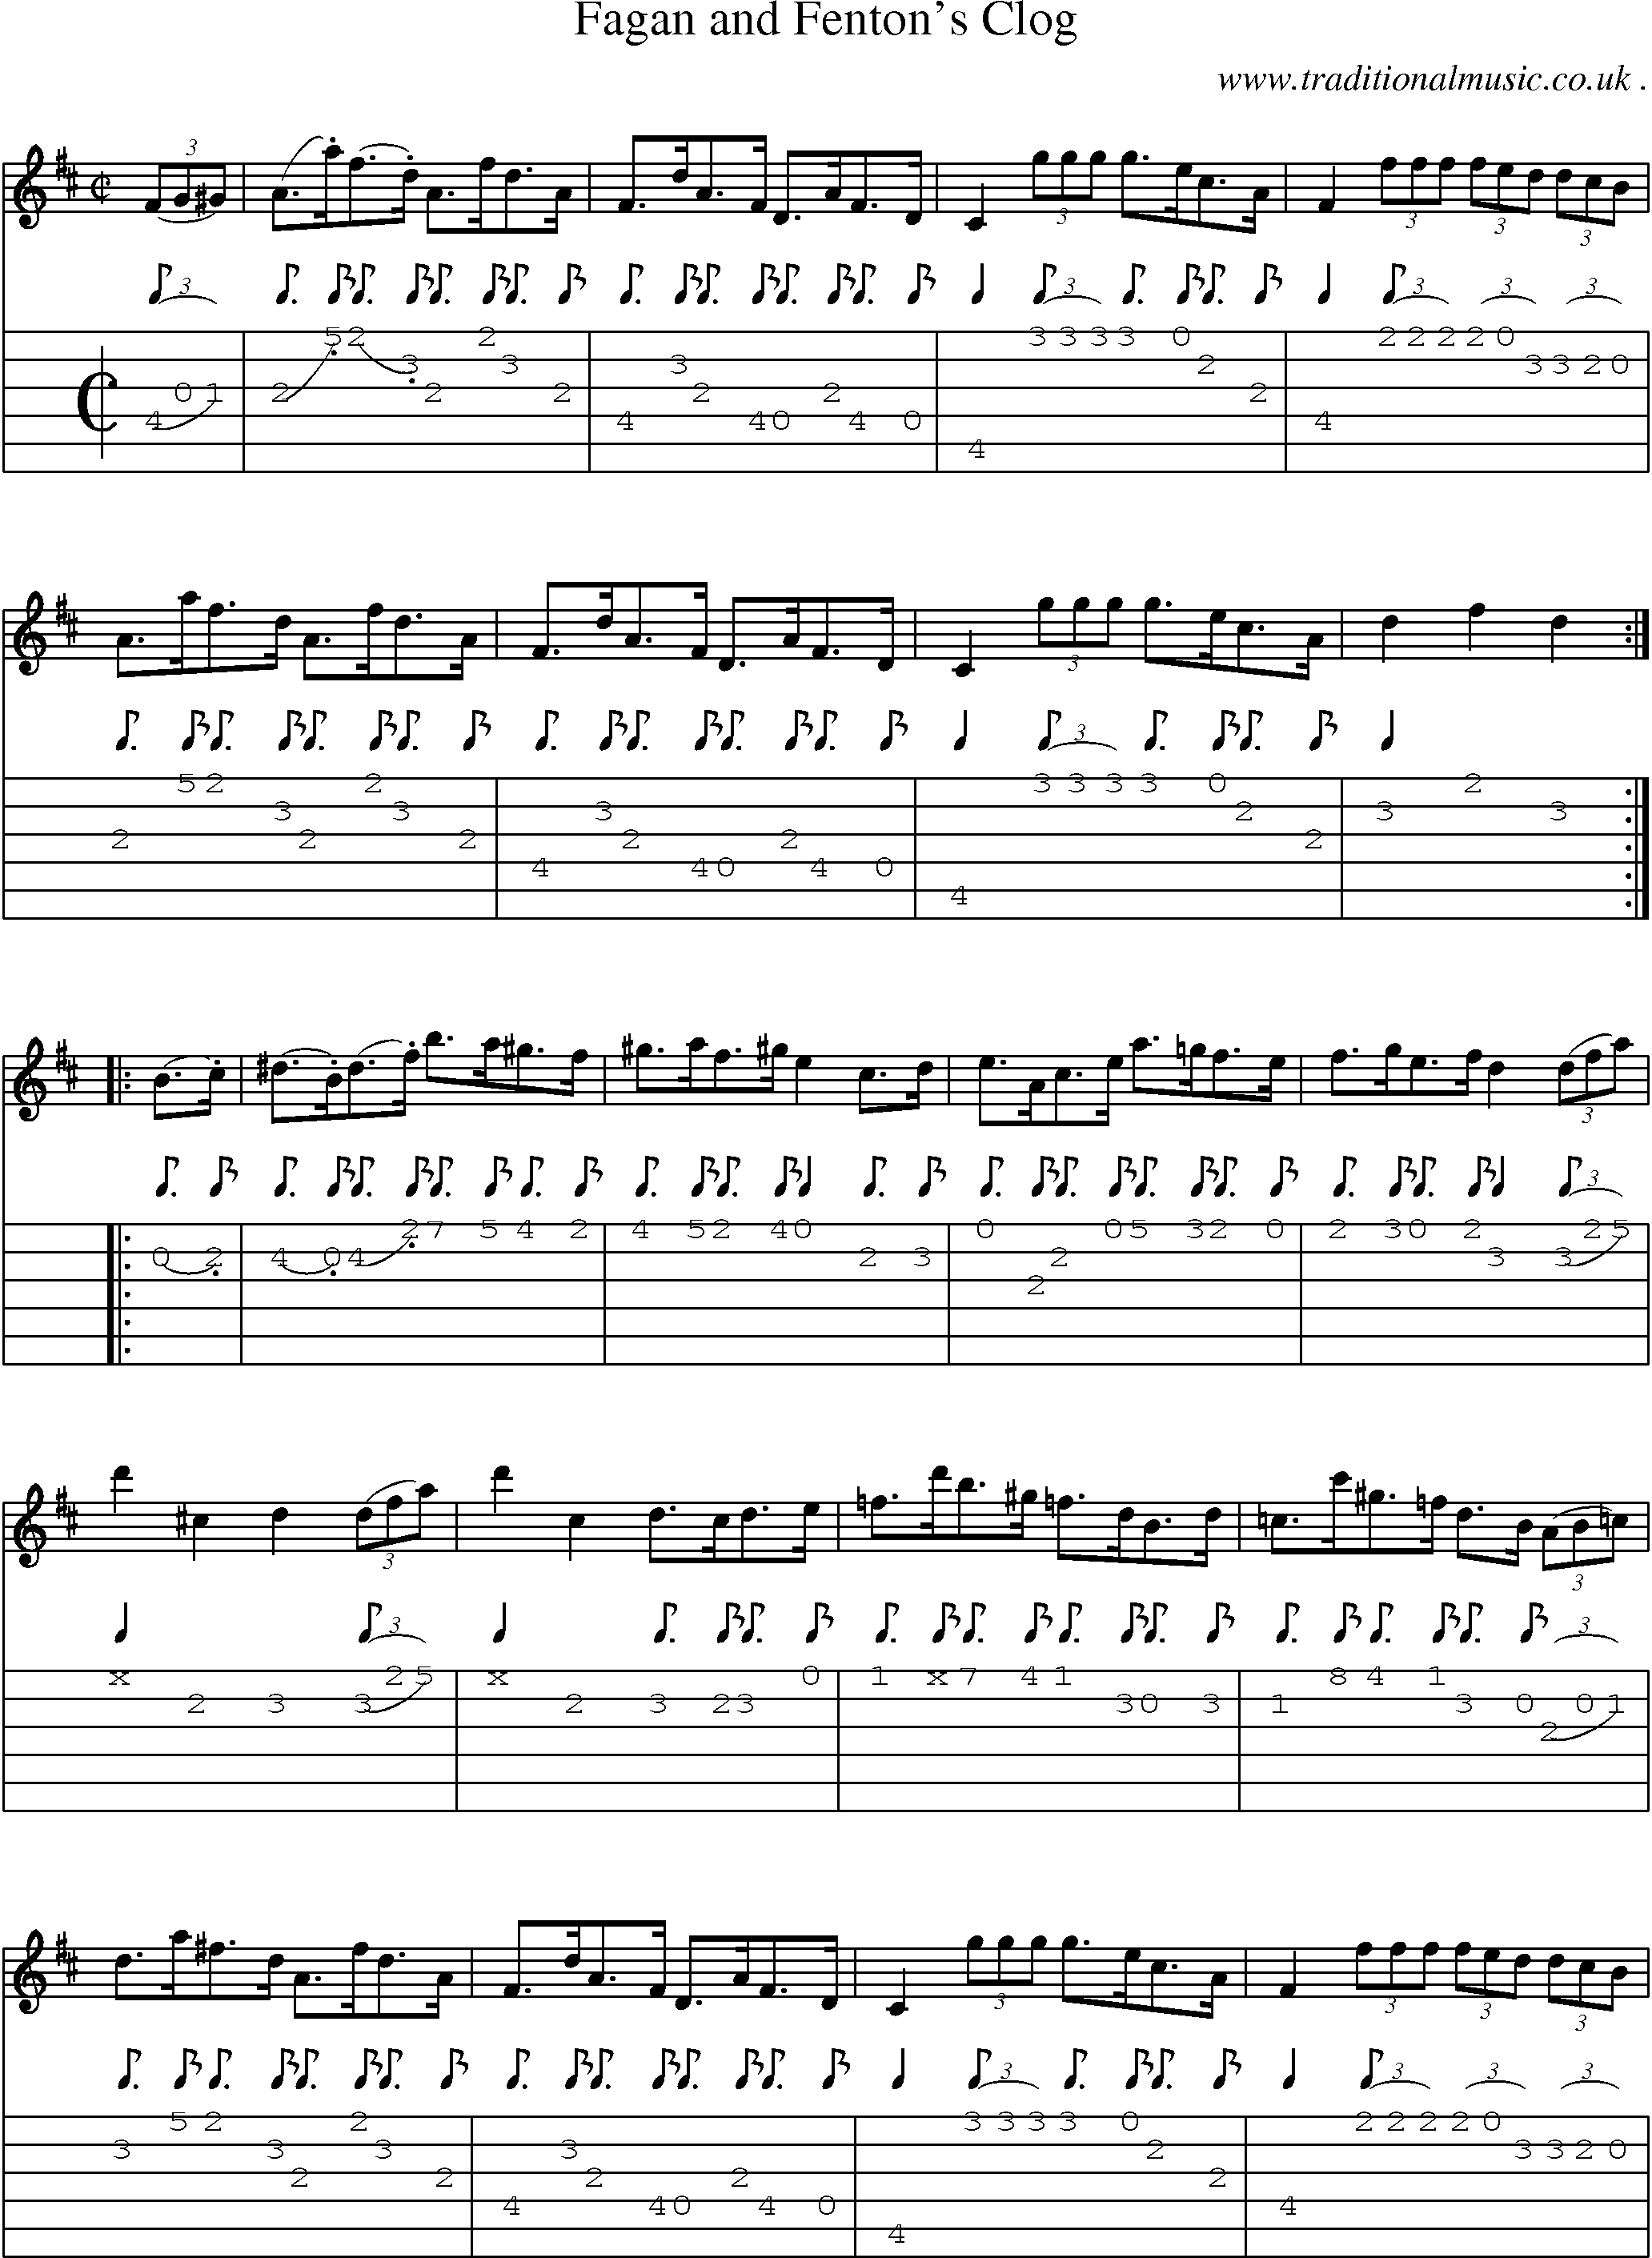 Sheet-Music and Guitar Tabs for Fagan And Fentons Clog